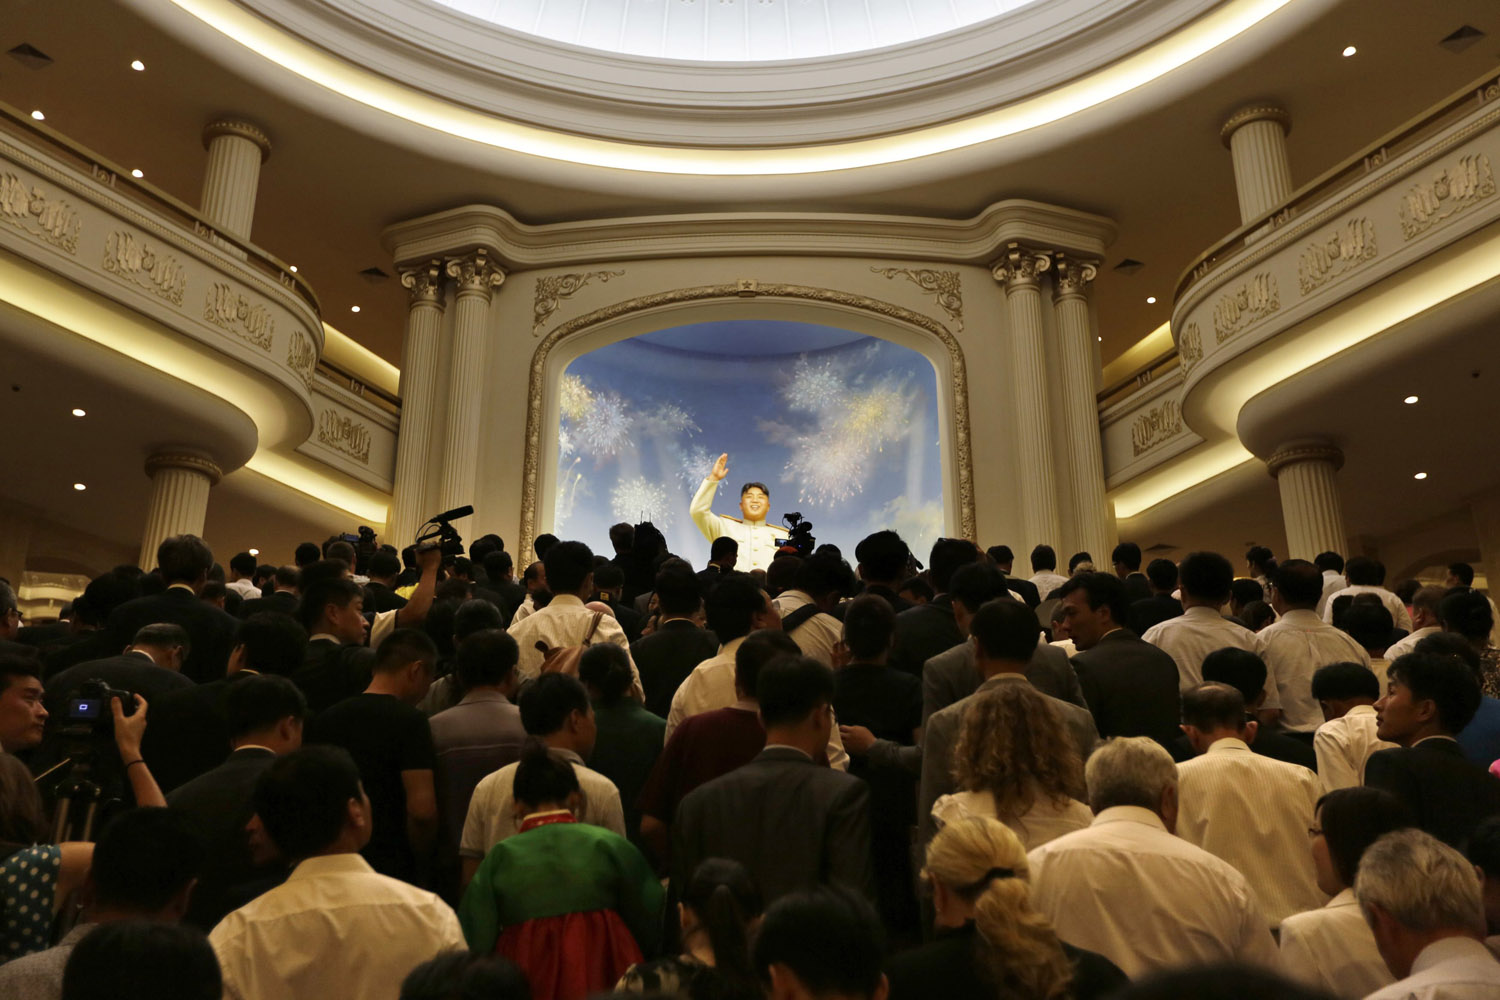 North Koreans and the media arrive to visit in front of a figure of North Korea founder Kim Il-sung in Pyongyang